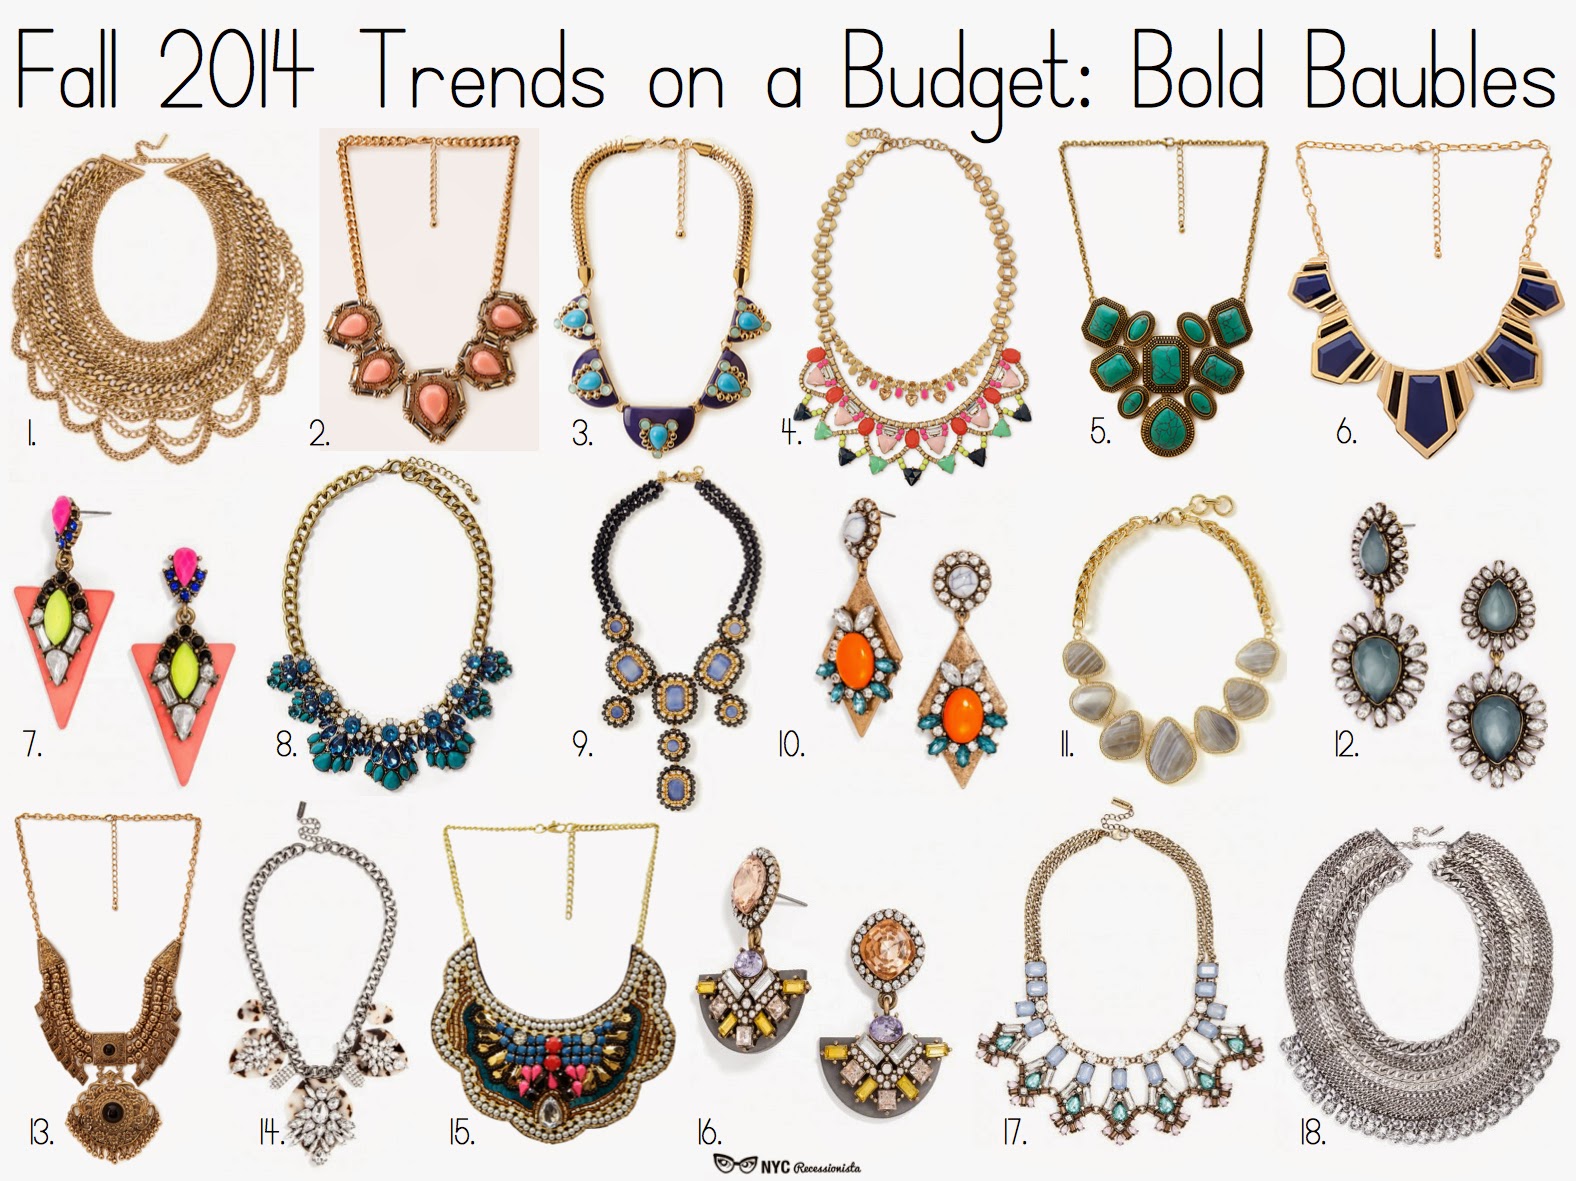 ... .com/2014/08/fall-2014-trends-on-budget-bold-baubles.html